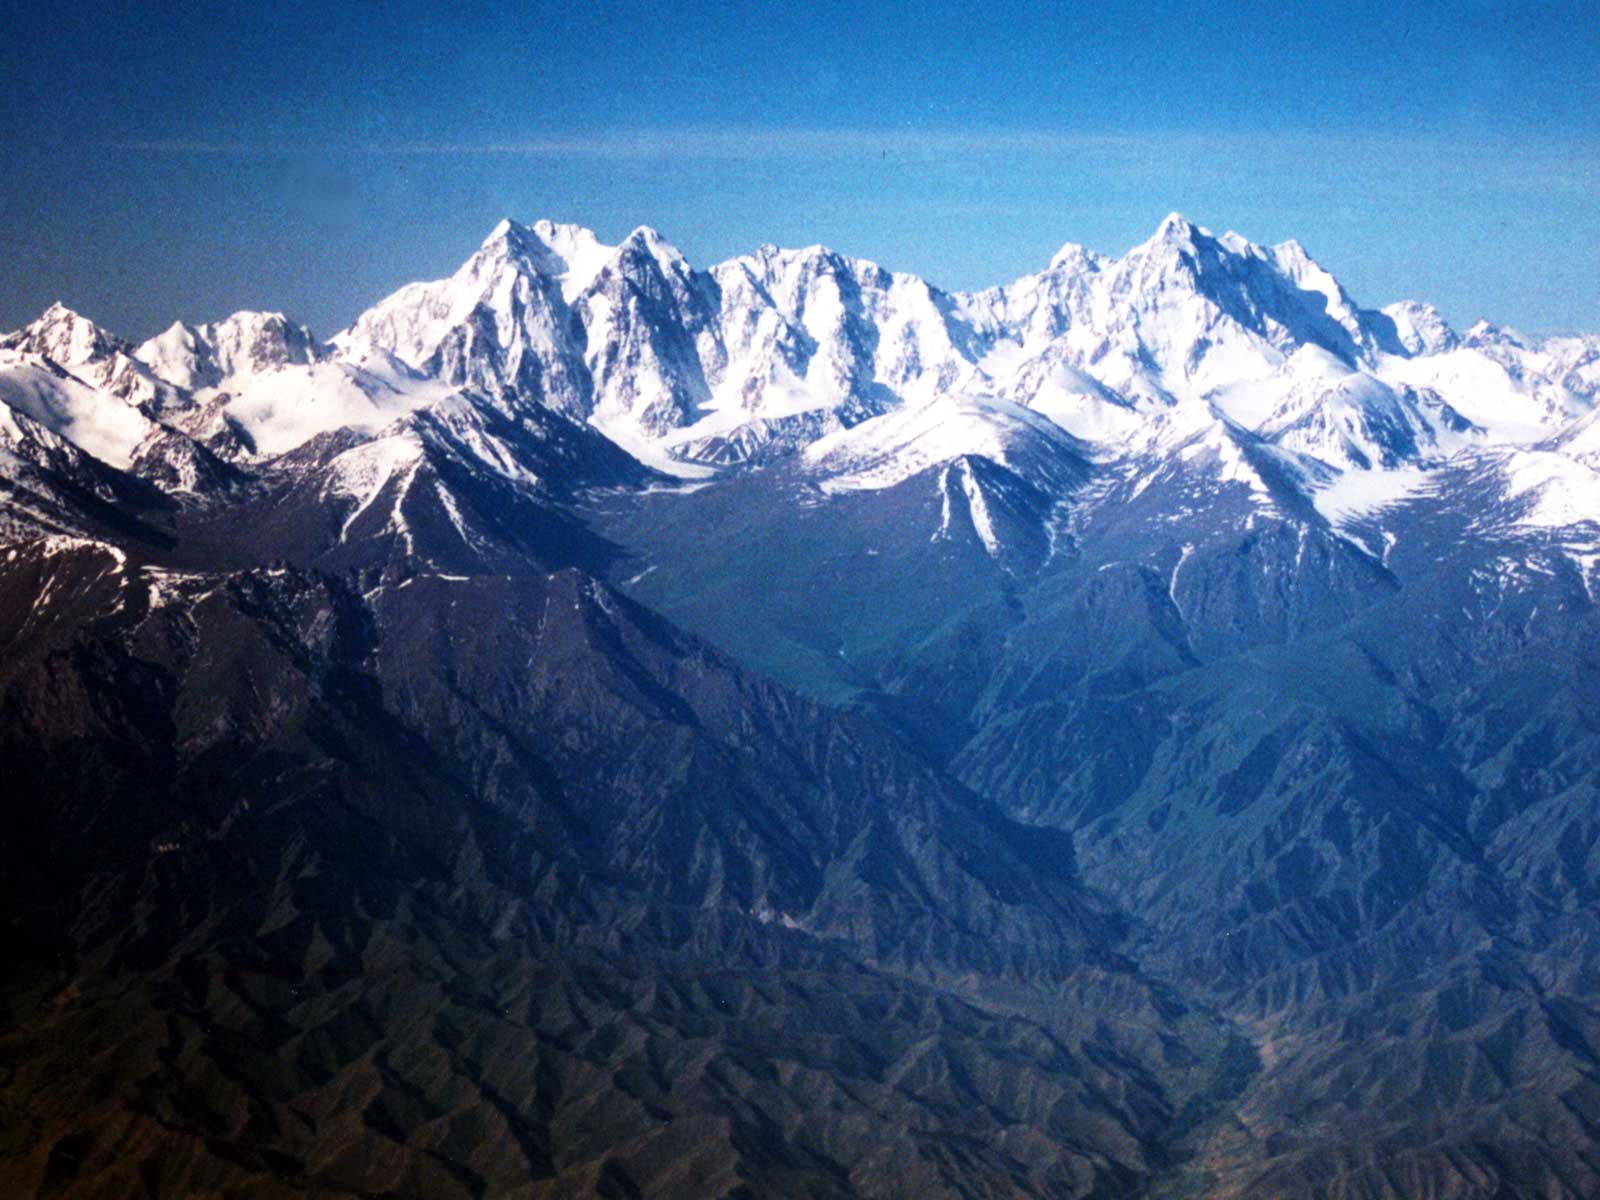 Tianshan from the air - Heavenly Mountains - 1995 University of Hawaii - Silk Road Study Tour - Steven Andrew Martin